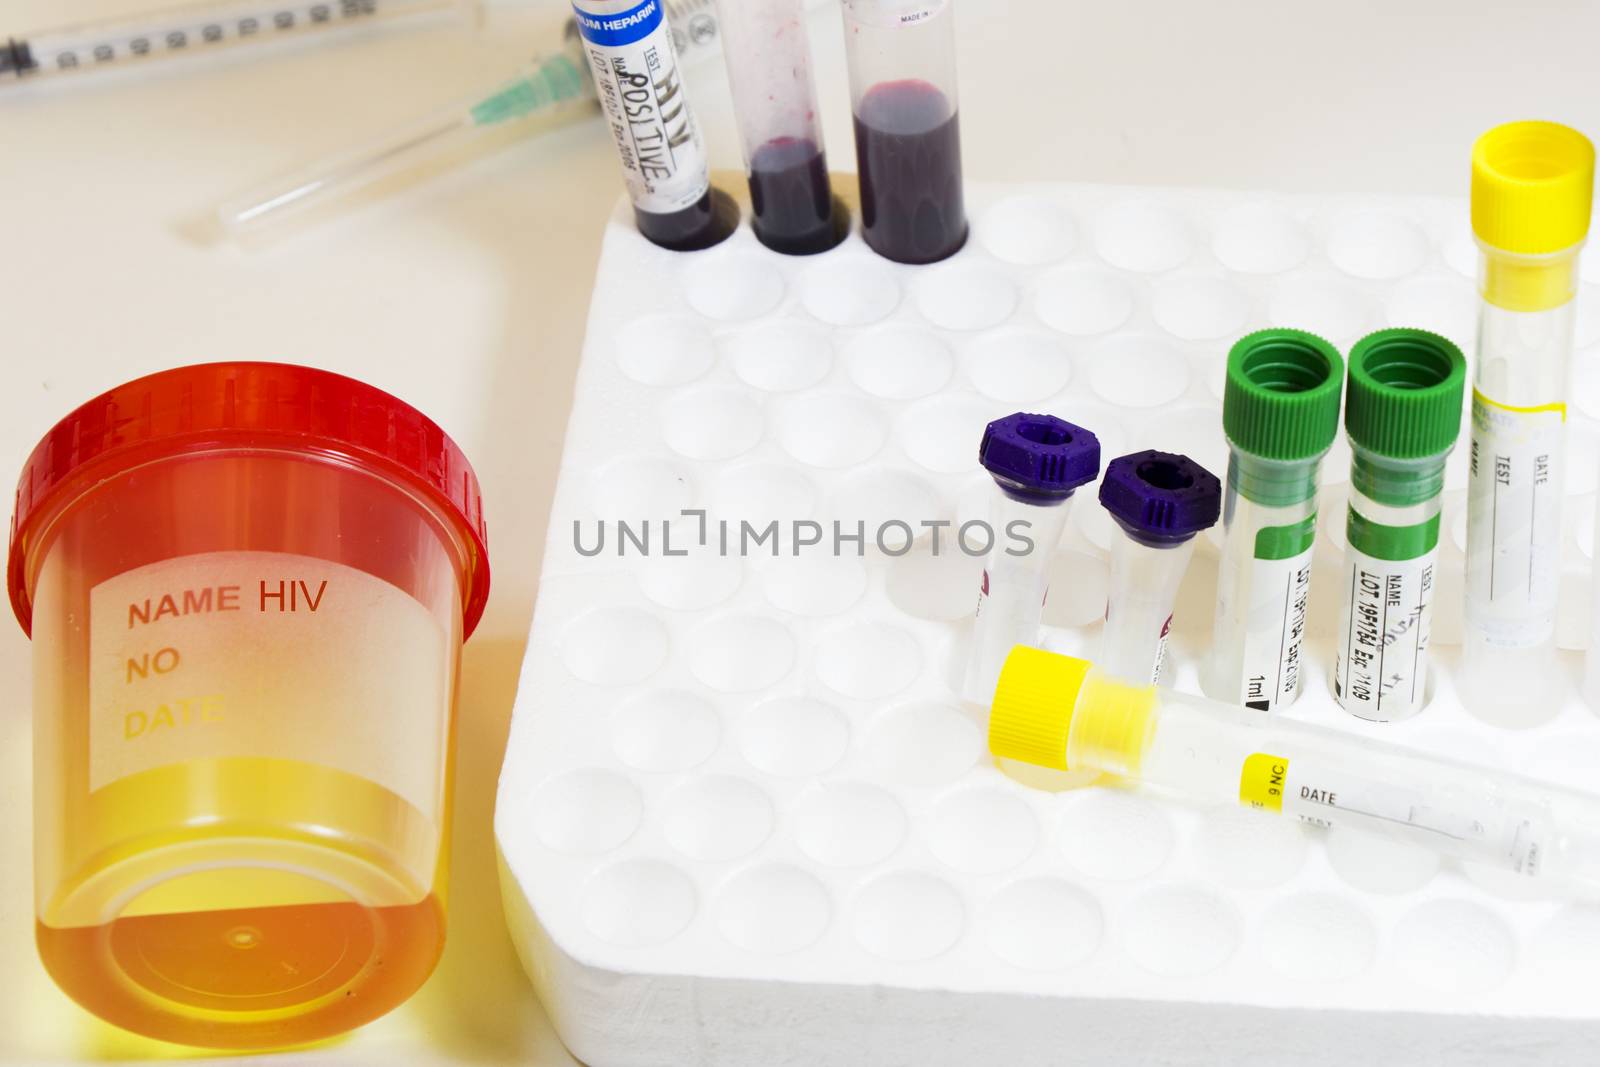 HIV and aids tests, medical urine and pee test with blood and other tubes on the white background, colorful lab test containers, viruses and infection laboratory tests